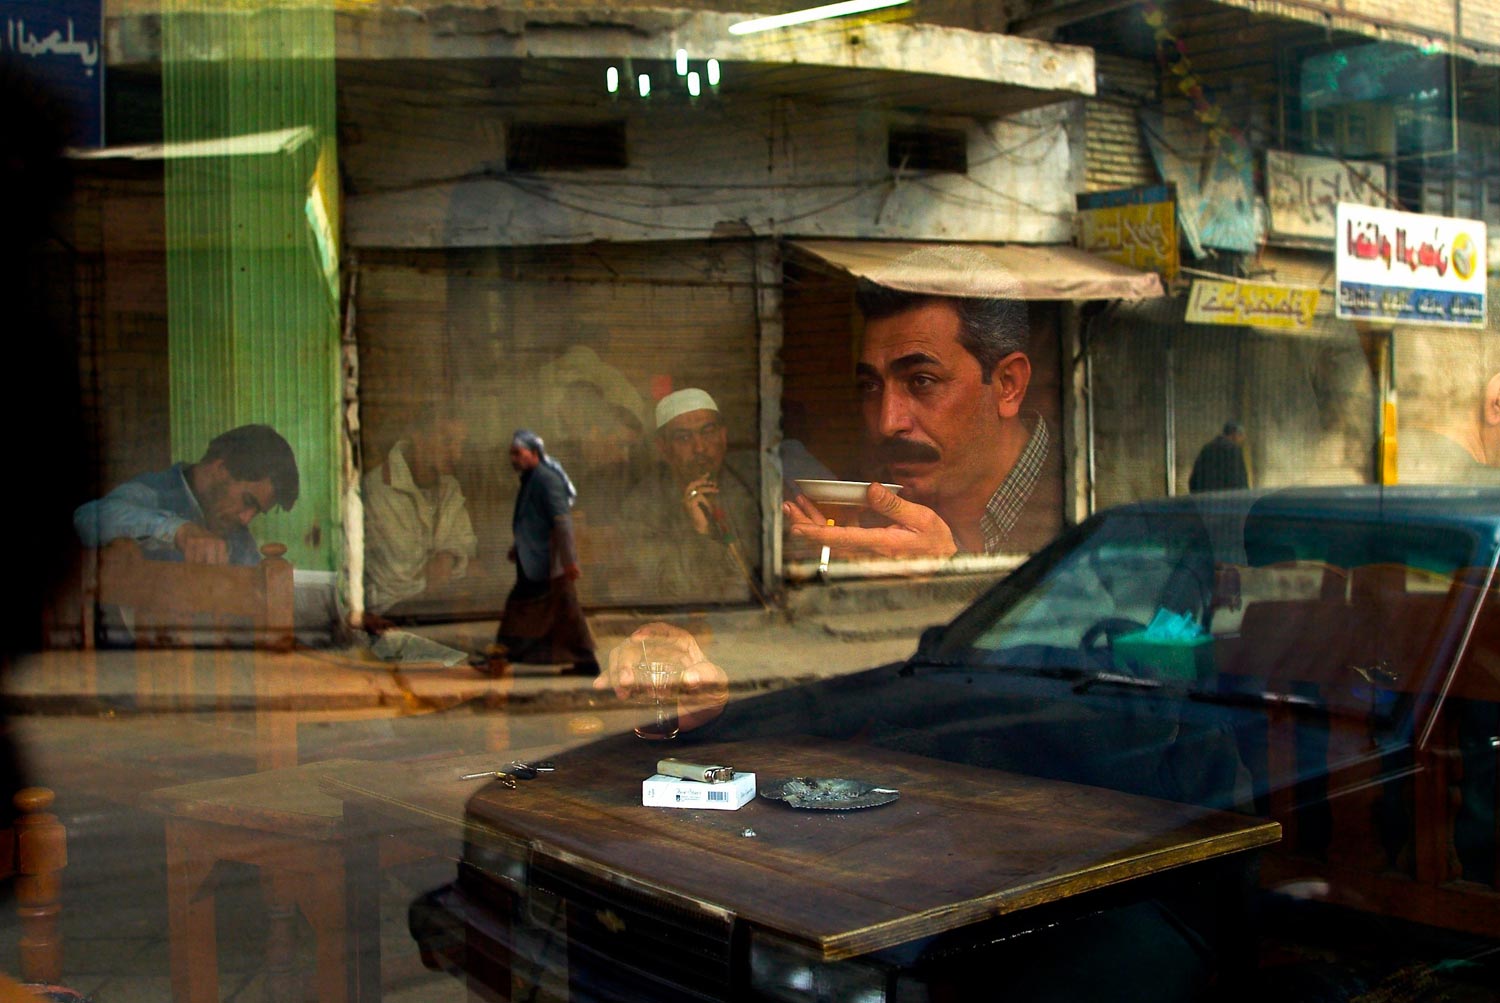 The window of the Al Zahawi cafe on Rashid street in Baghdad, Iraq, February 12, 2003. The cafe was named after a famous local poet and musician.